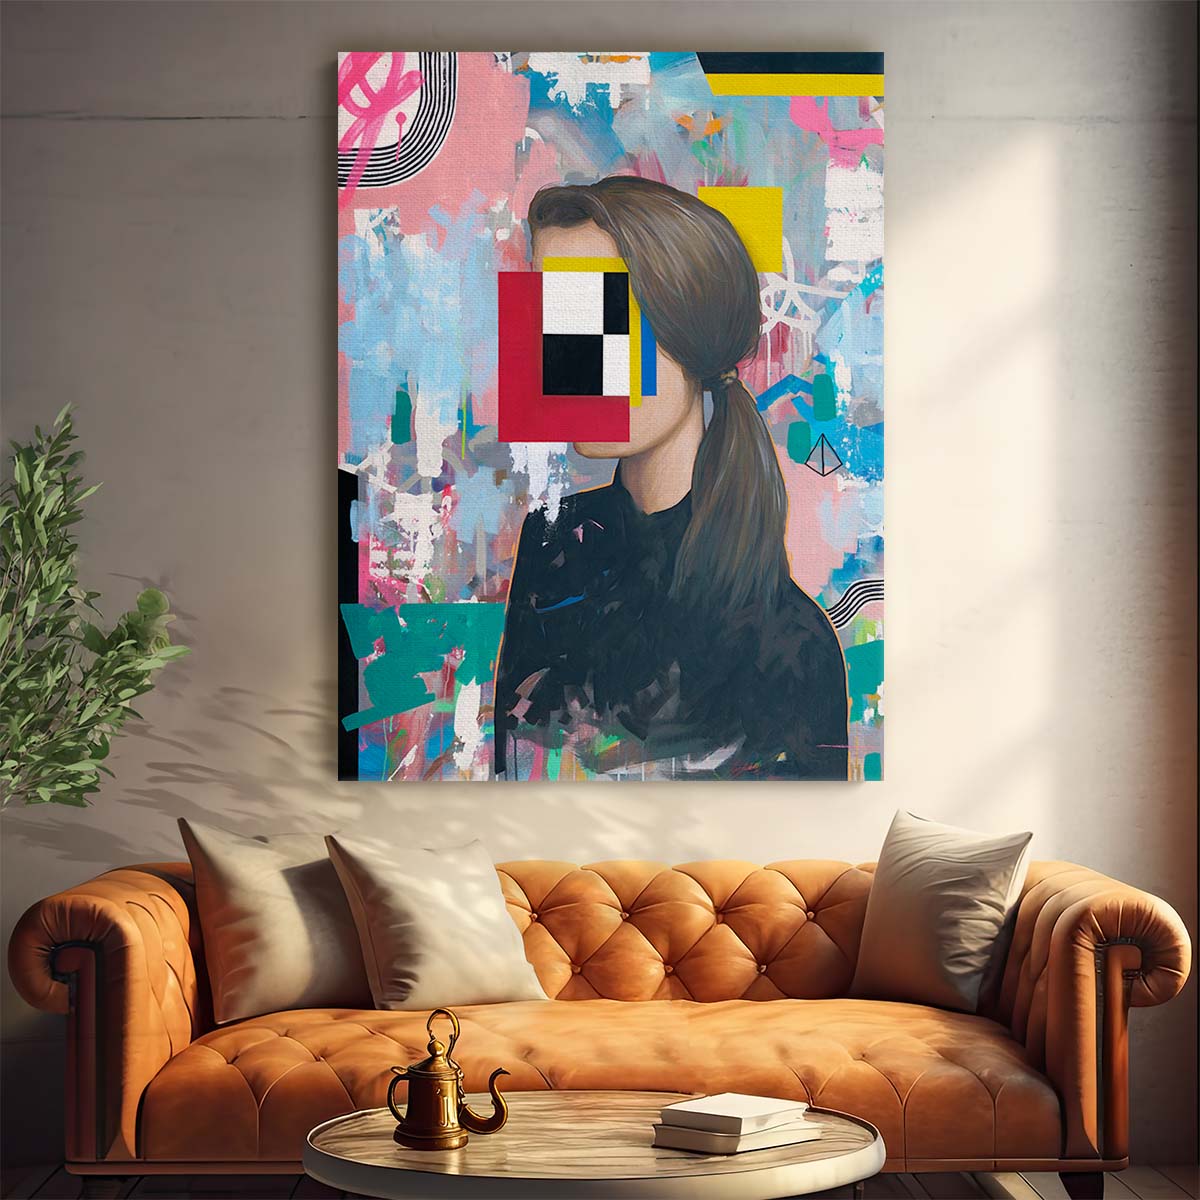 Surreal Girl Illustration, Vivid Street Art Painting by Famous When Dead by Luxuriance Designs, made in USA